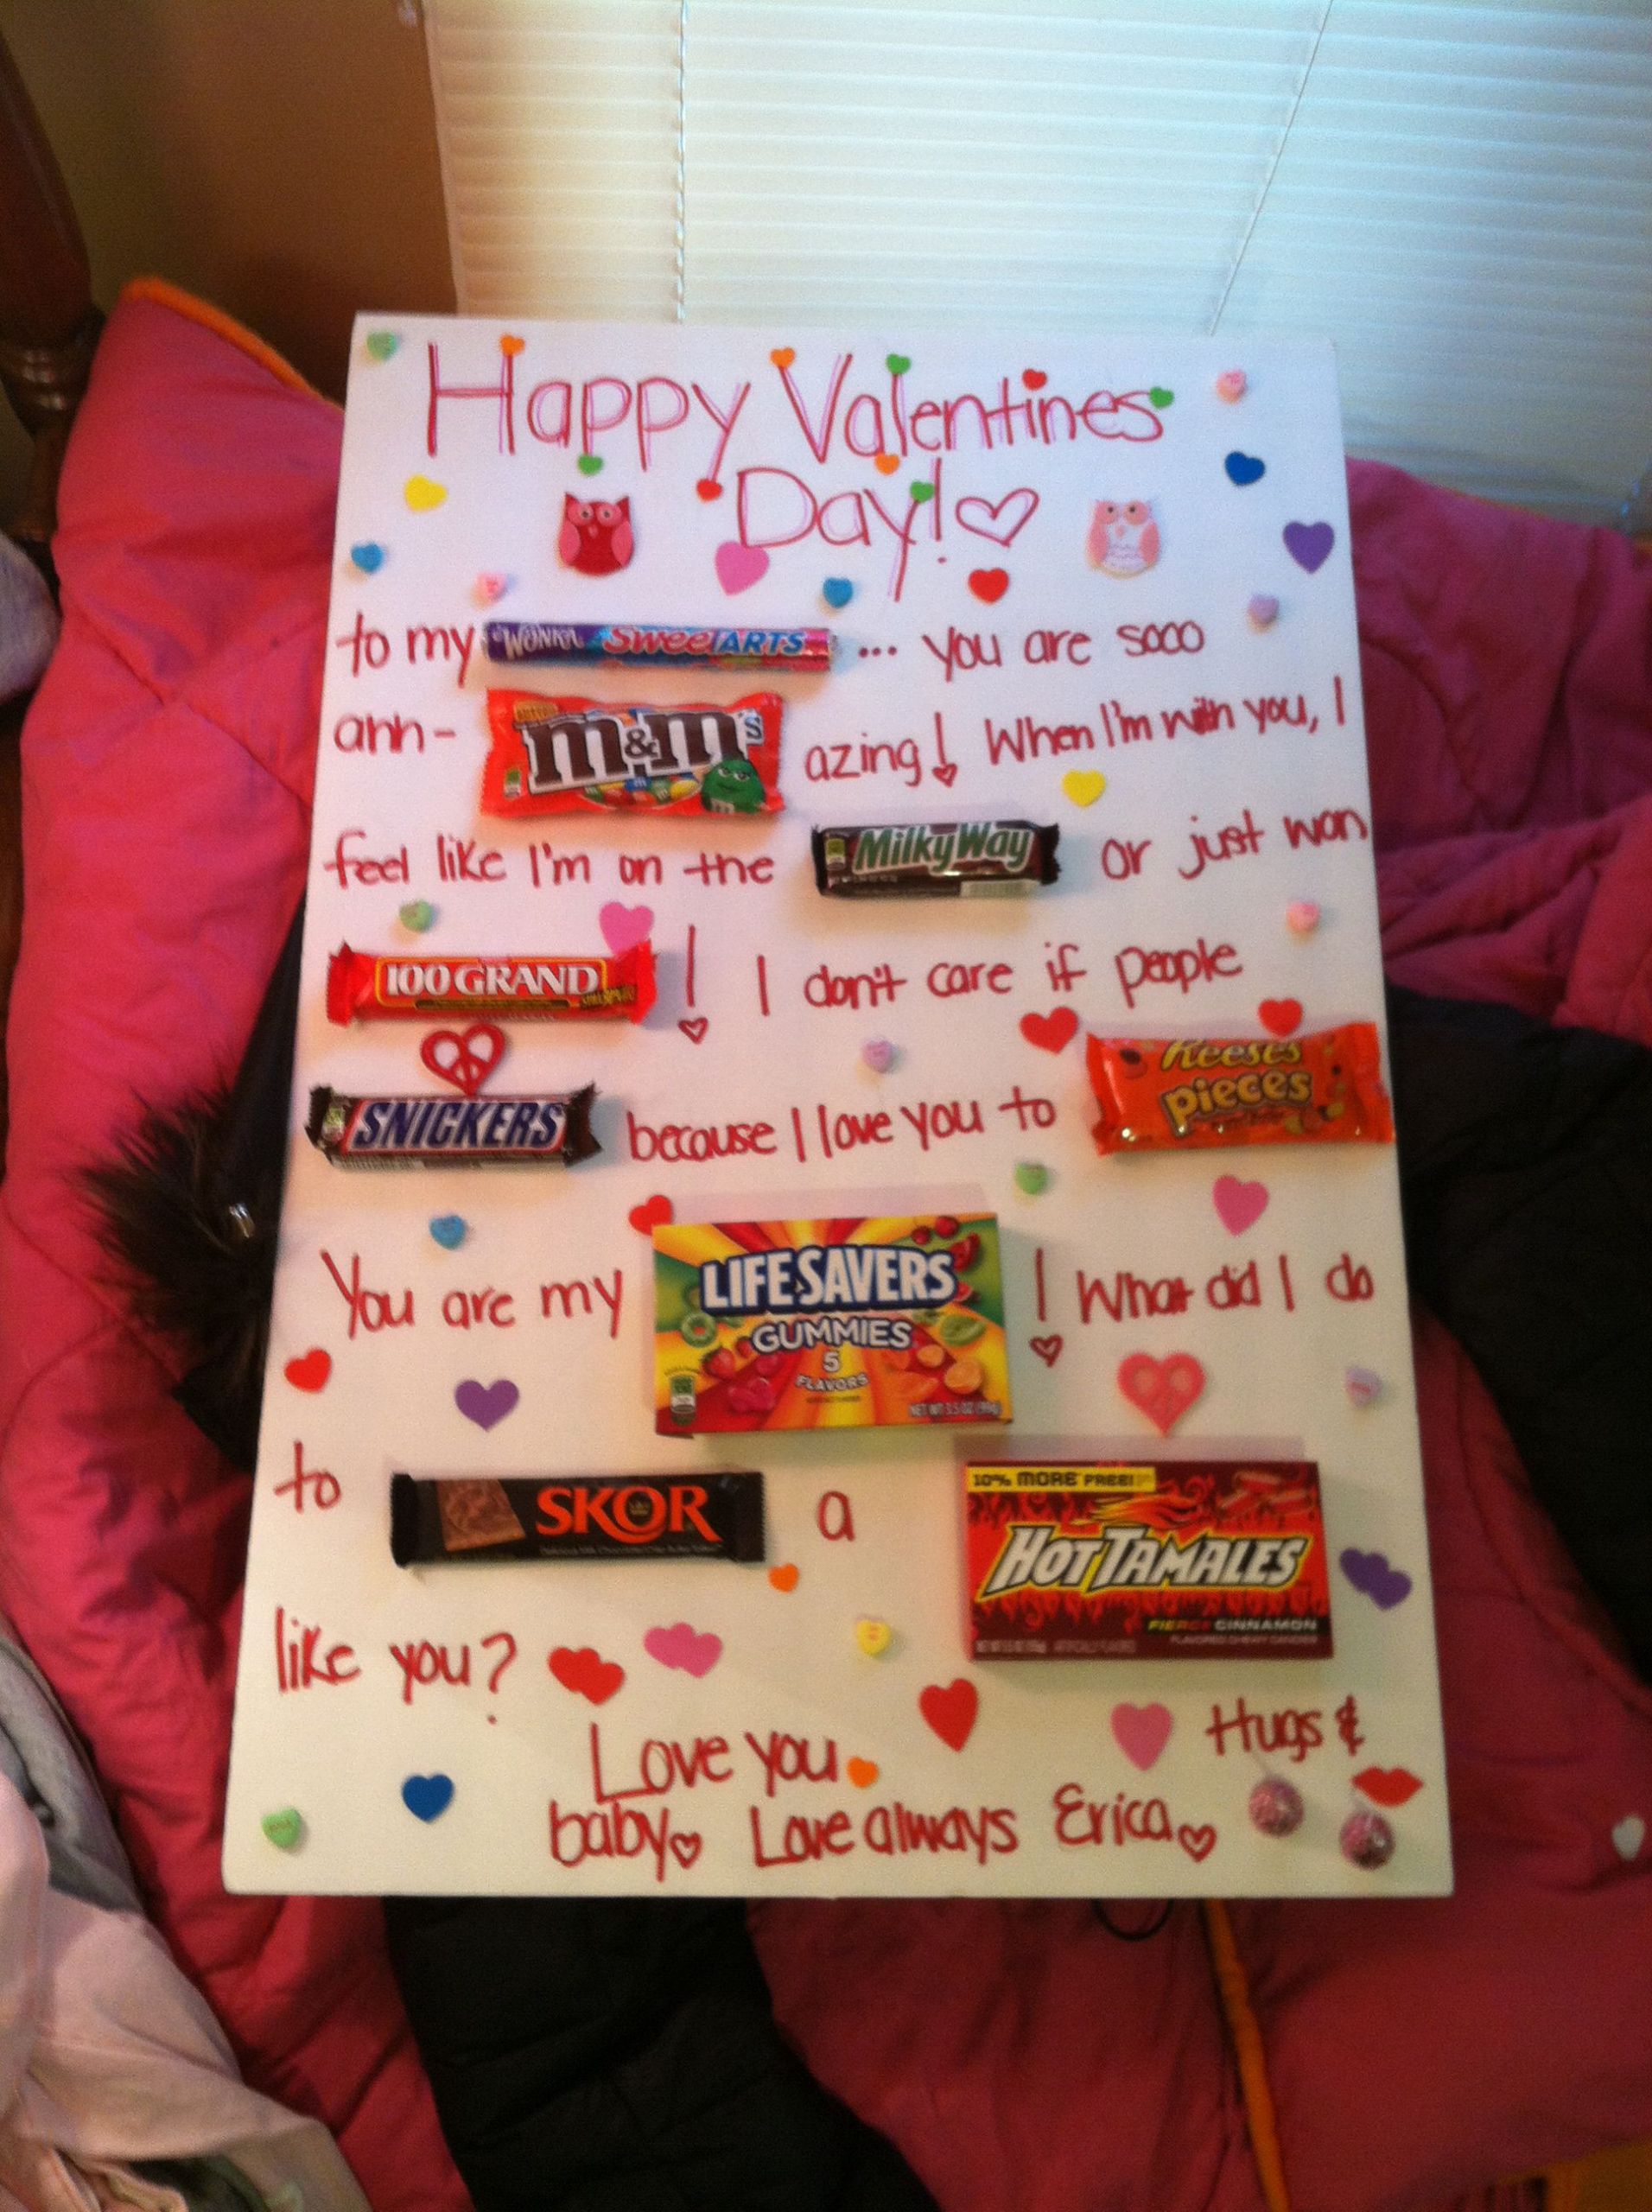 Cute Valentines Day Gift Ideas For Him
 Valentines for him